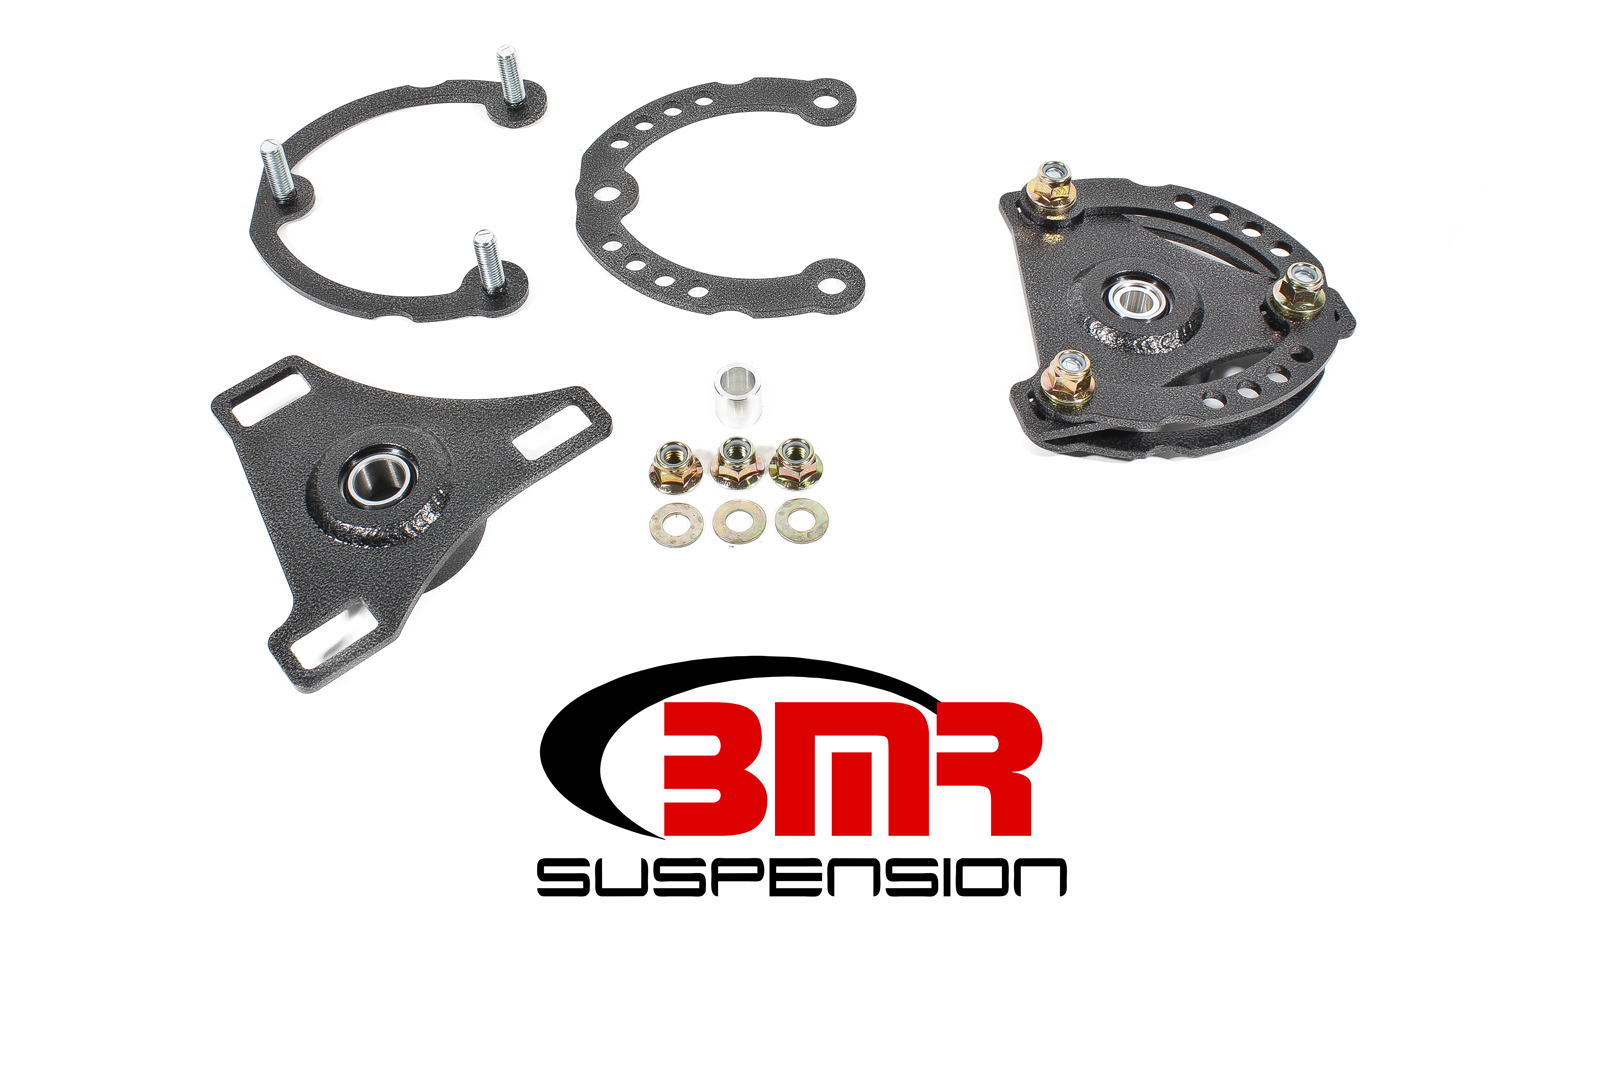 BMR Suspension Caster/Camber Plates, Independent Caster/Camber Adjustment, Aluminum, Gray Anodize, Ford Mustang 2015-17, Kit